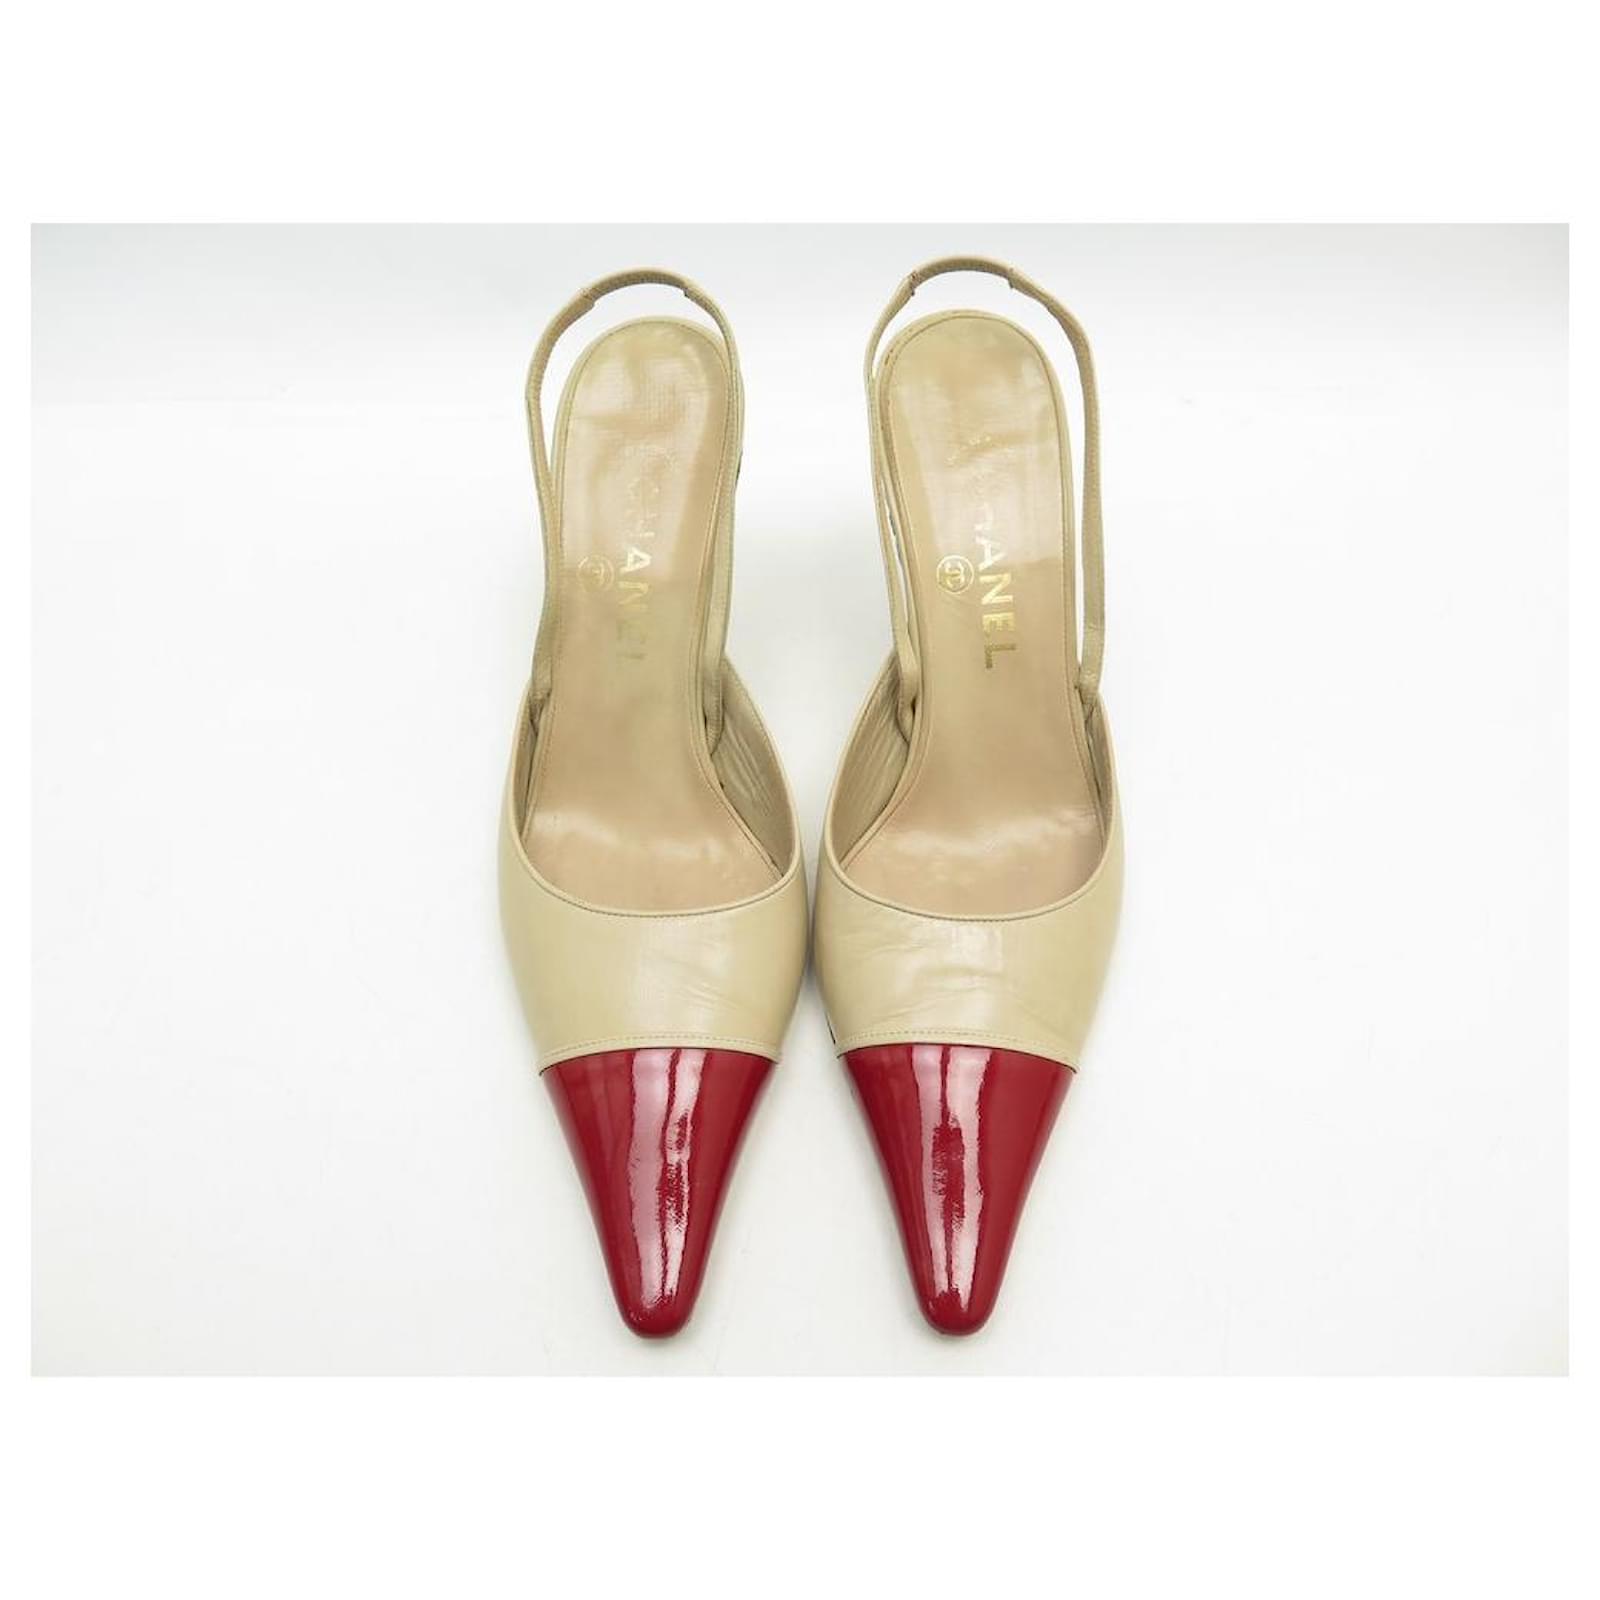 CHANEL PUMPS SLINGBACK SHOES 38 RED BEIGE LEATHER PUMP SHOES ref